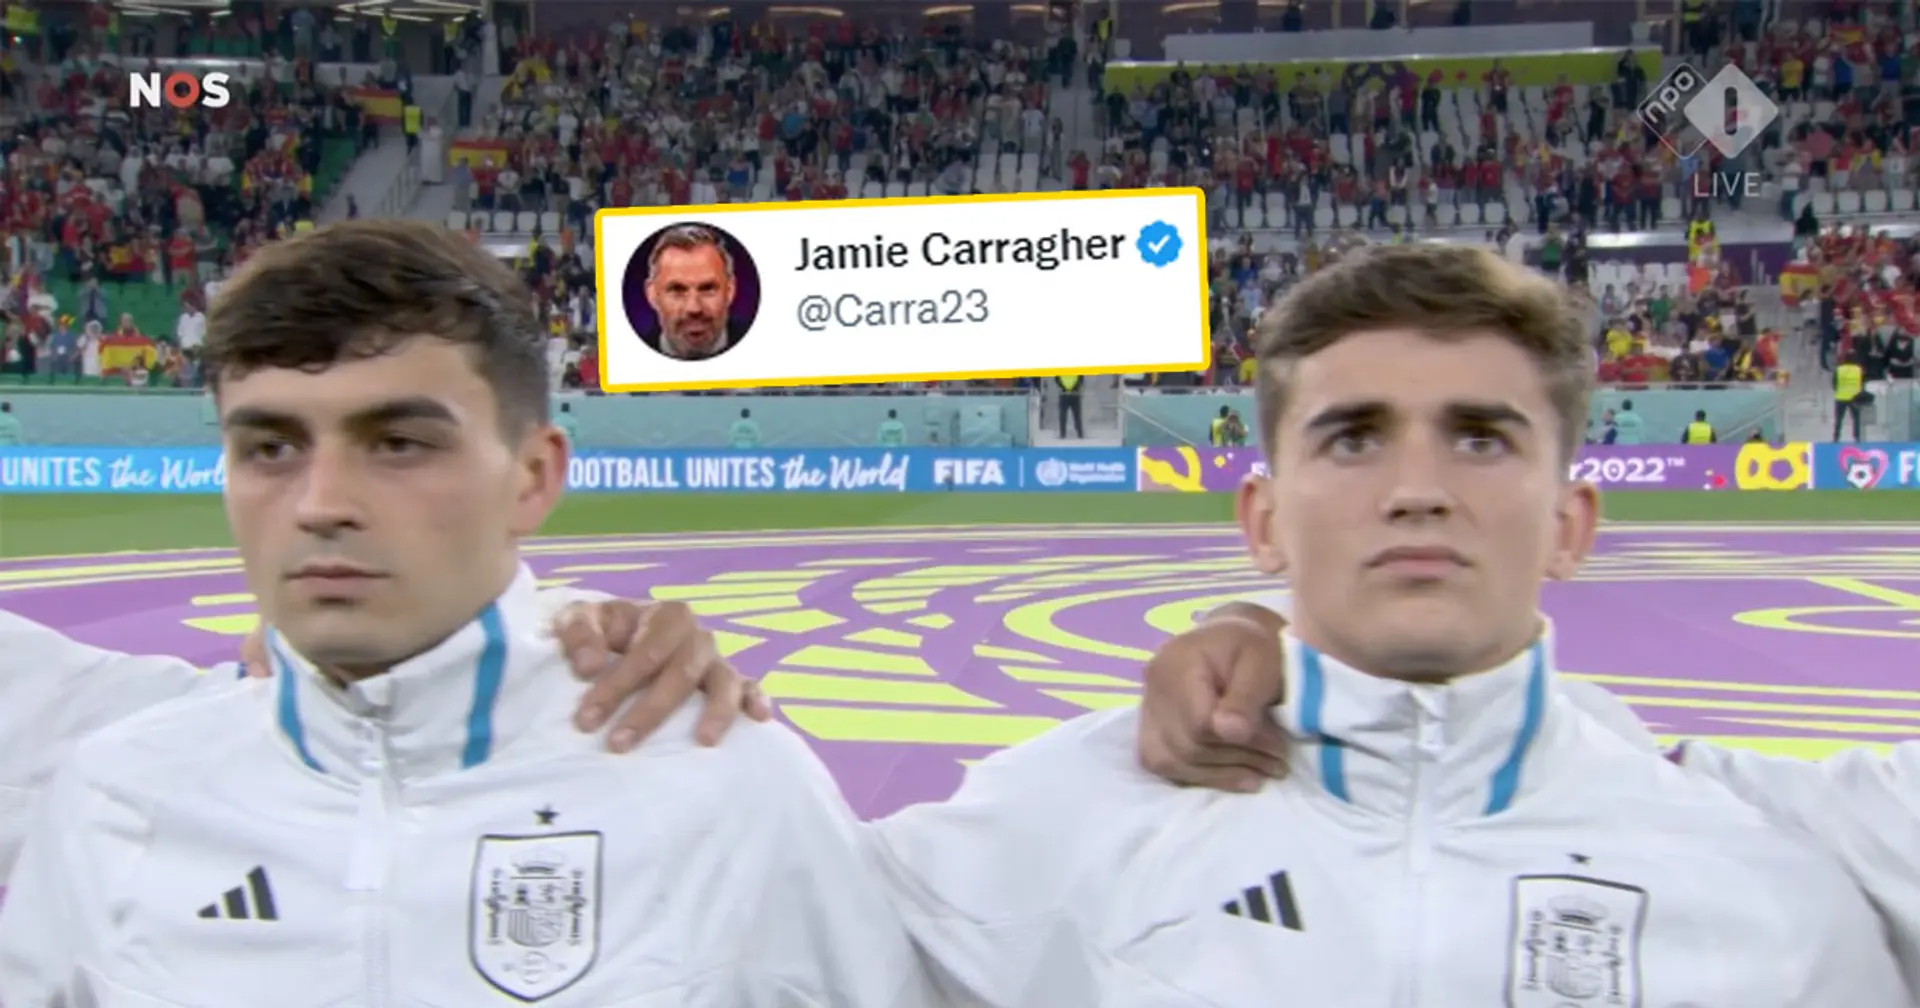 Liverpool legend Carragher names one Blaugrana 'player of the tournament so far' - he's yet to finish first game